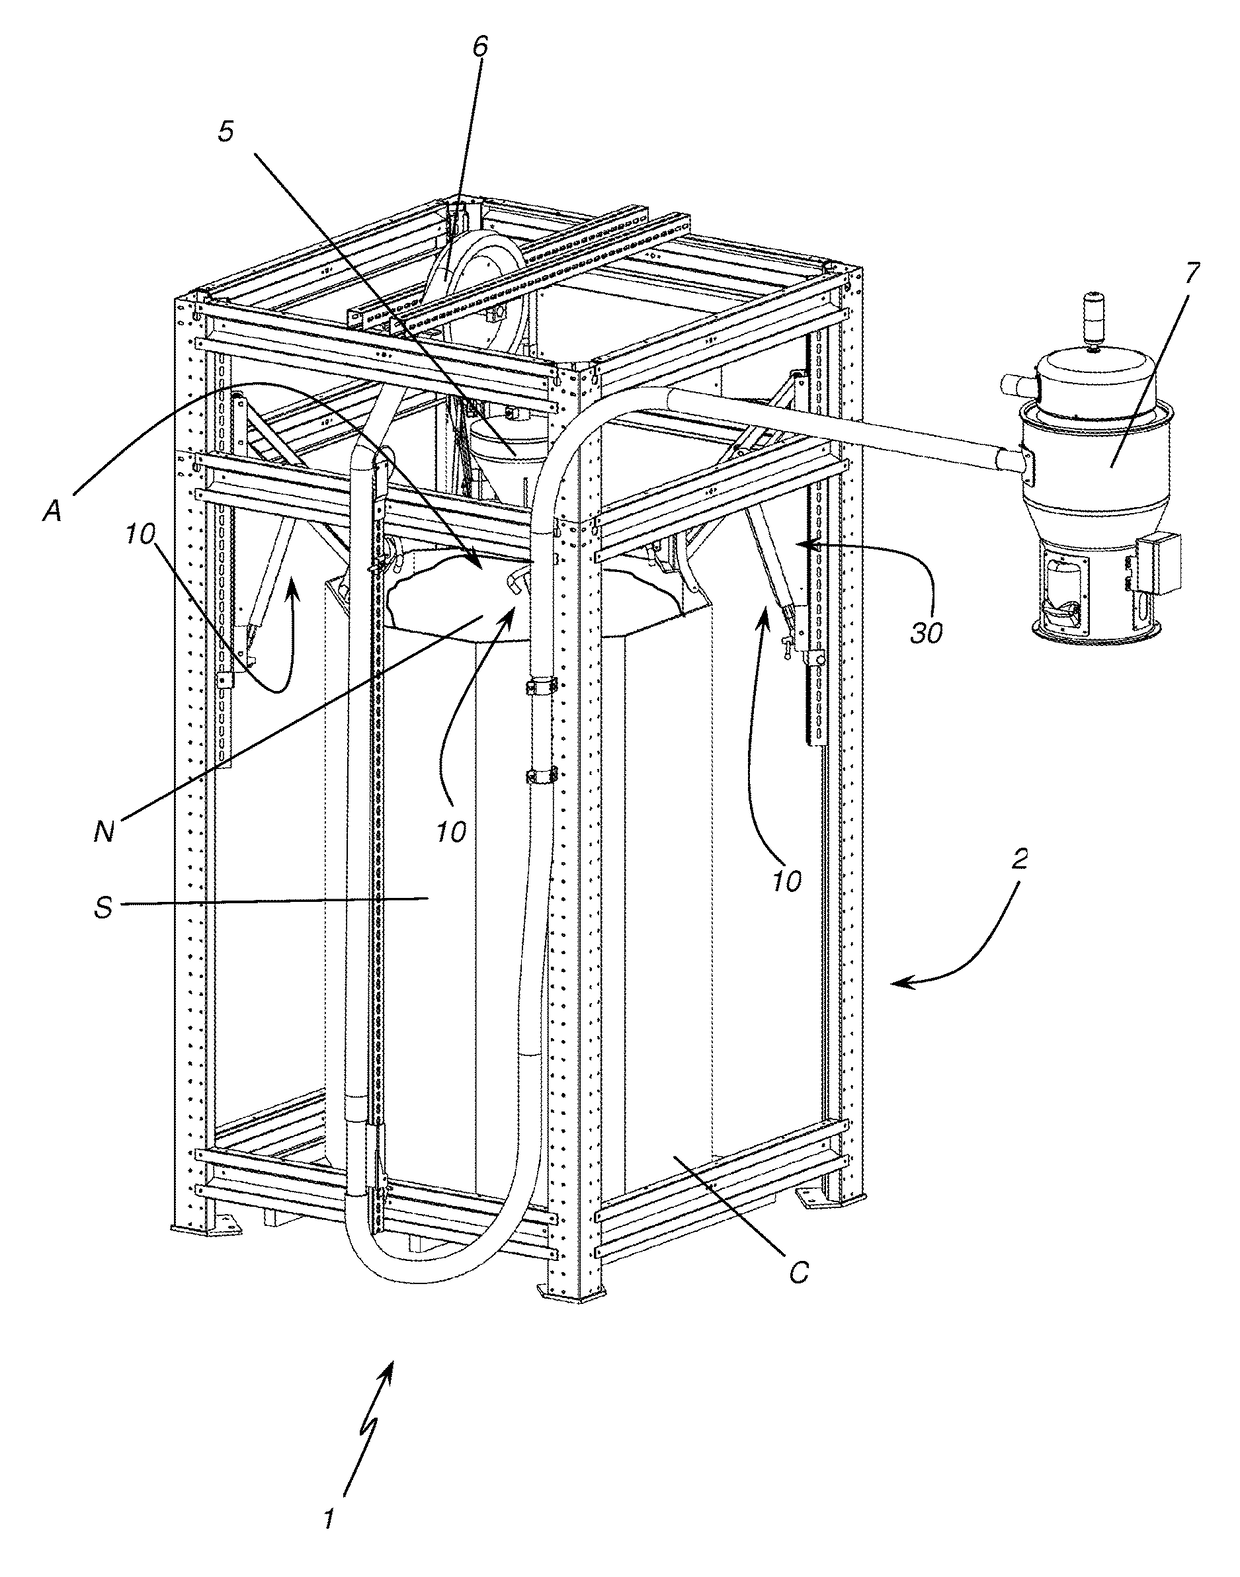 Emptying device for storage containers of granular materials or the like